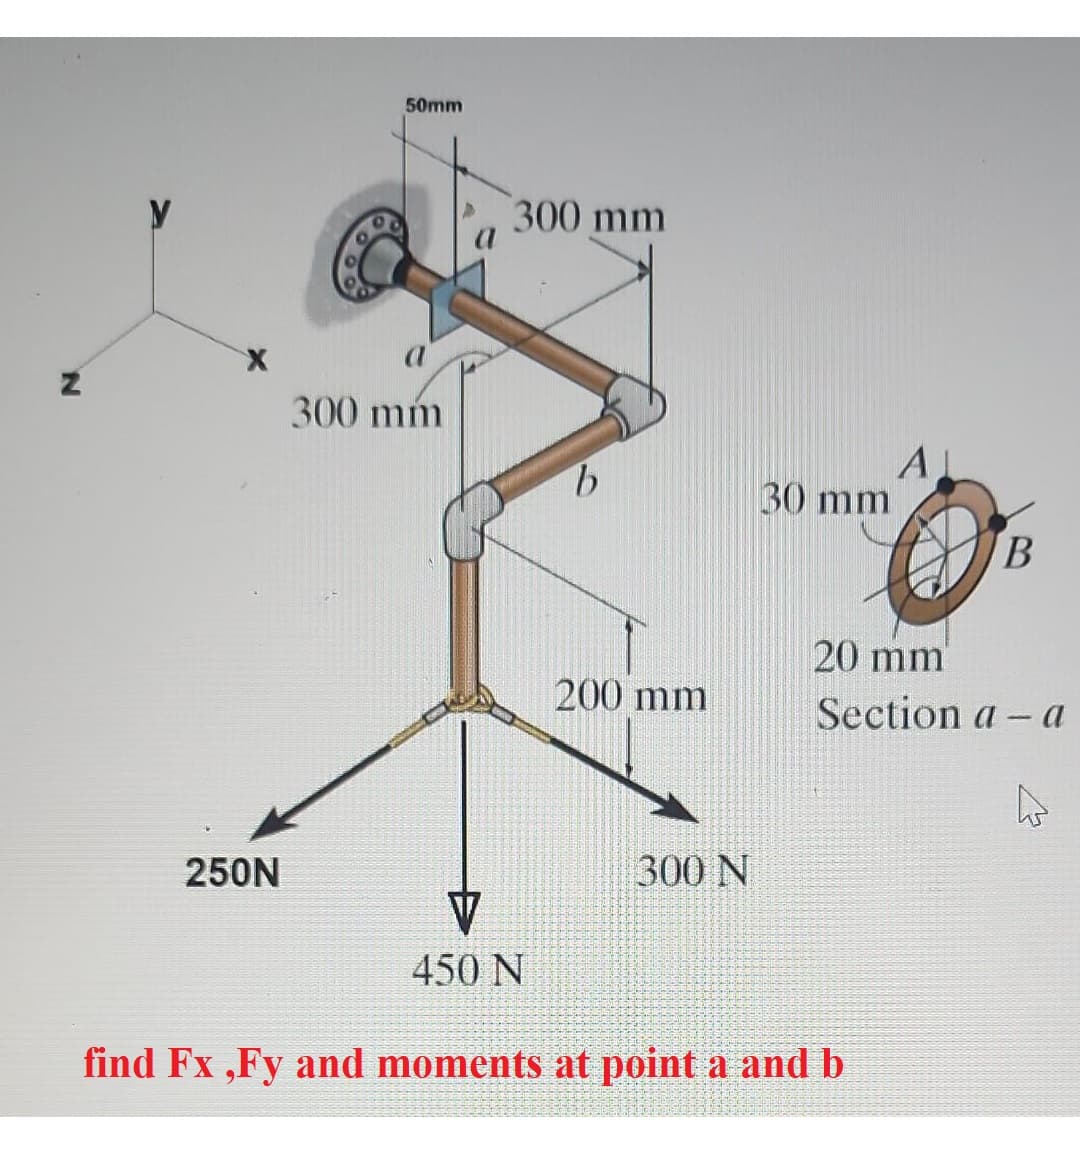 N
250N
50mm
300 mm
300 mm
b
200 mm
300 N
30 mm
A
V
450 N
find Fx,Fy and moments at point a and b
B
20 mm
Section a - a
s